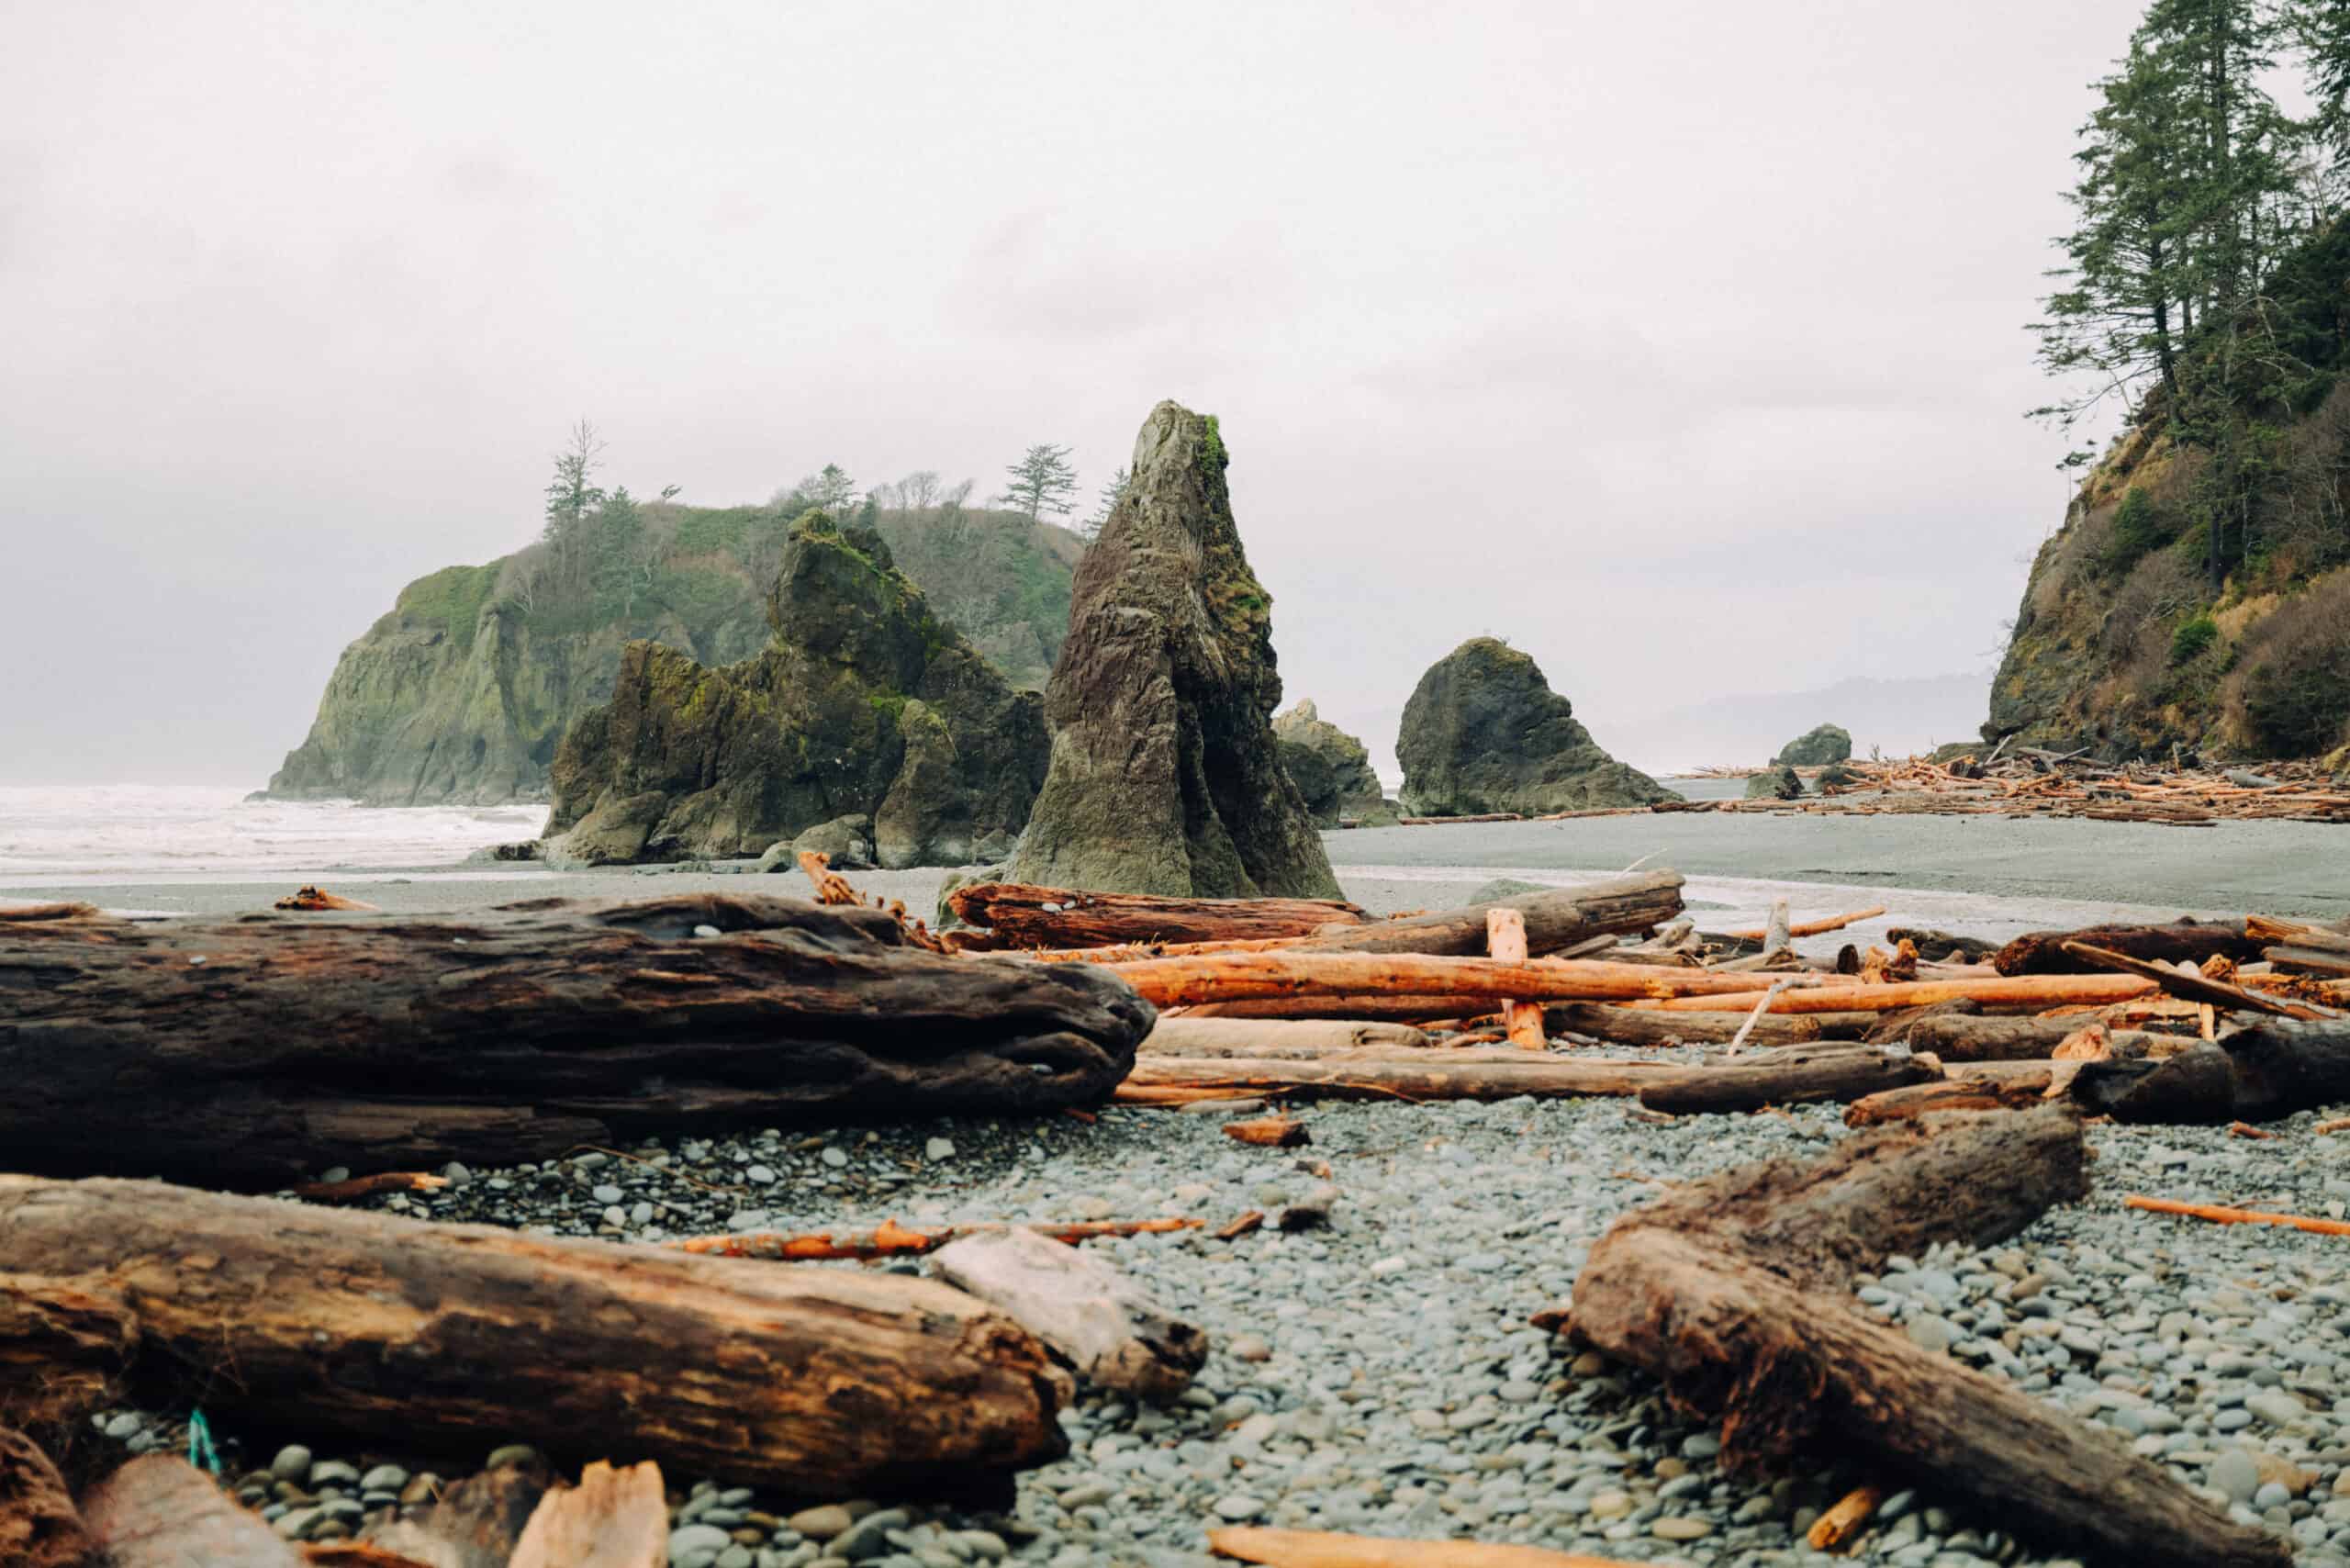 The Ultimate Guide To Ruby Beach on The Olympic Peninsula (1 Day Itinerary)